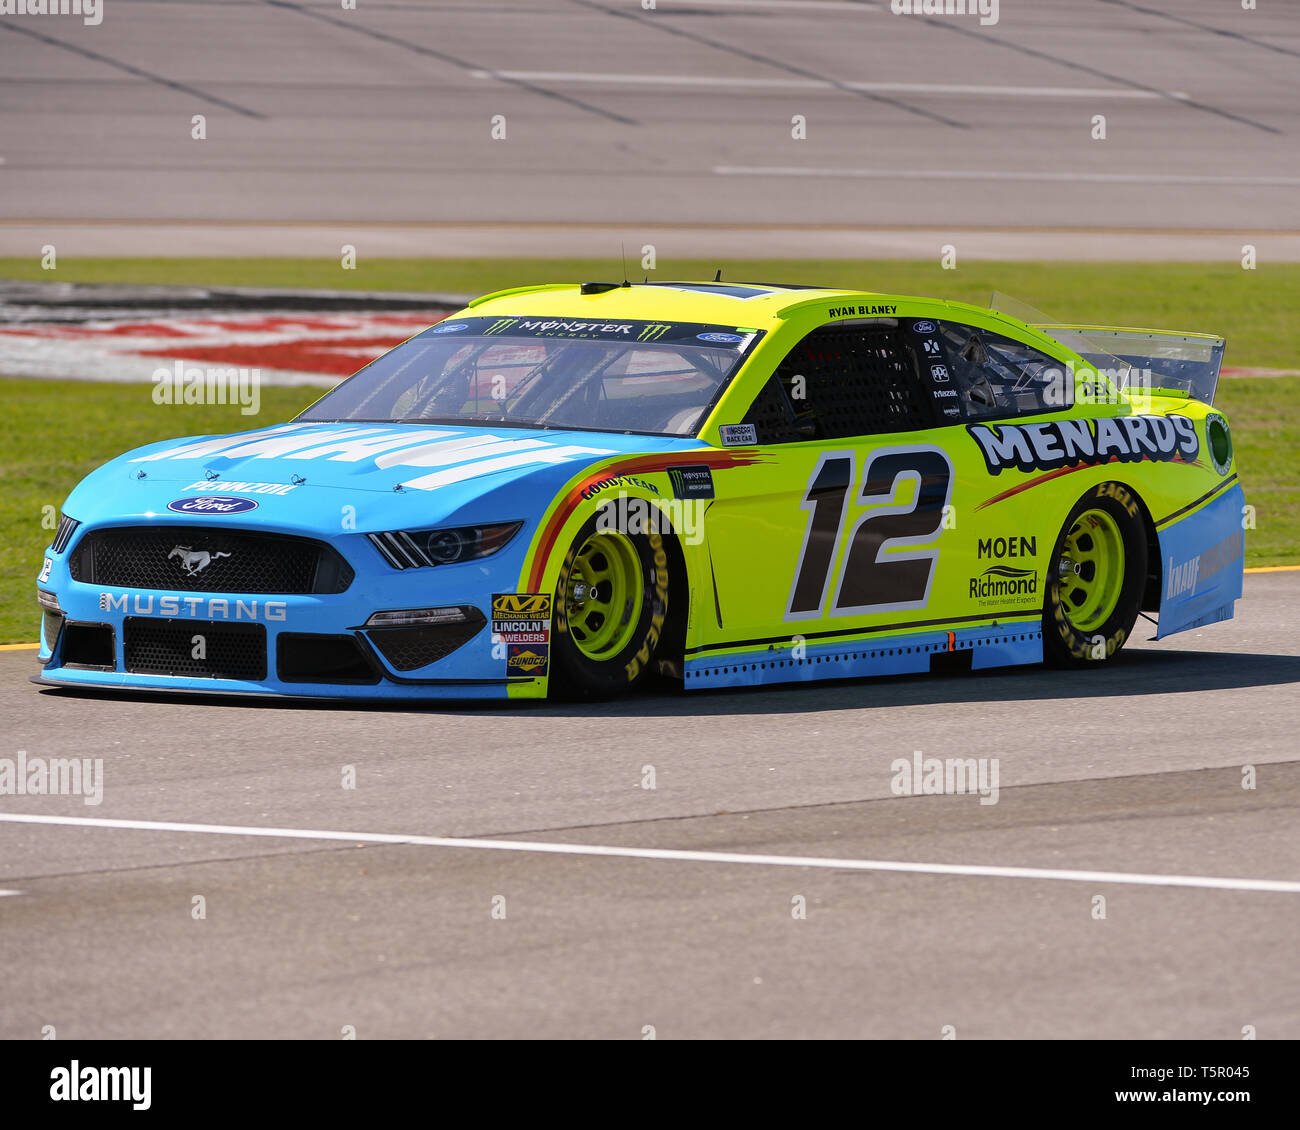 Lincoln, AL, USA. 26th Apr, 2019. The Menards/Knauf Ford (12), driven by Ryan Blaney, on the track during the General Tire 200 at Talladega Super Speedway in Lincoln, AL. Kevin Langley/Sports South Media/CSM/Alamy Live News Stock Photo